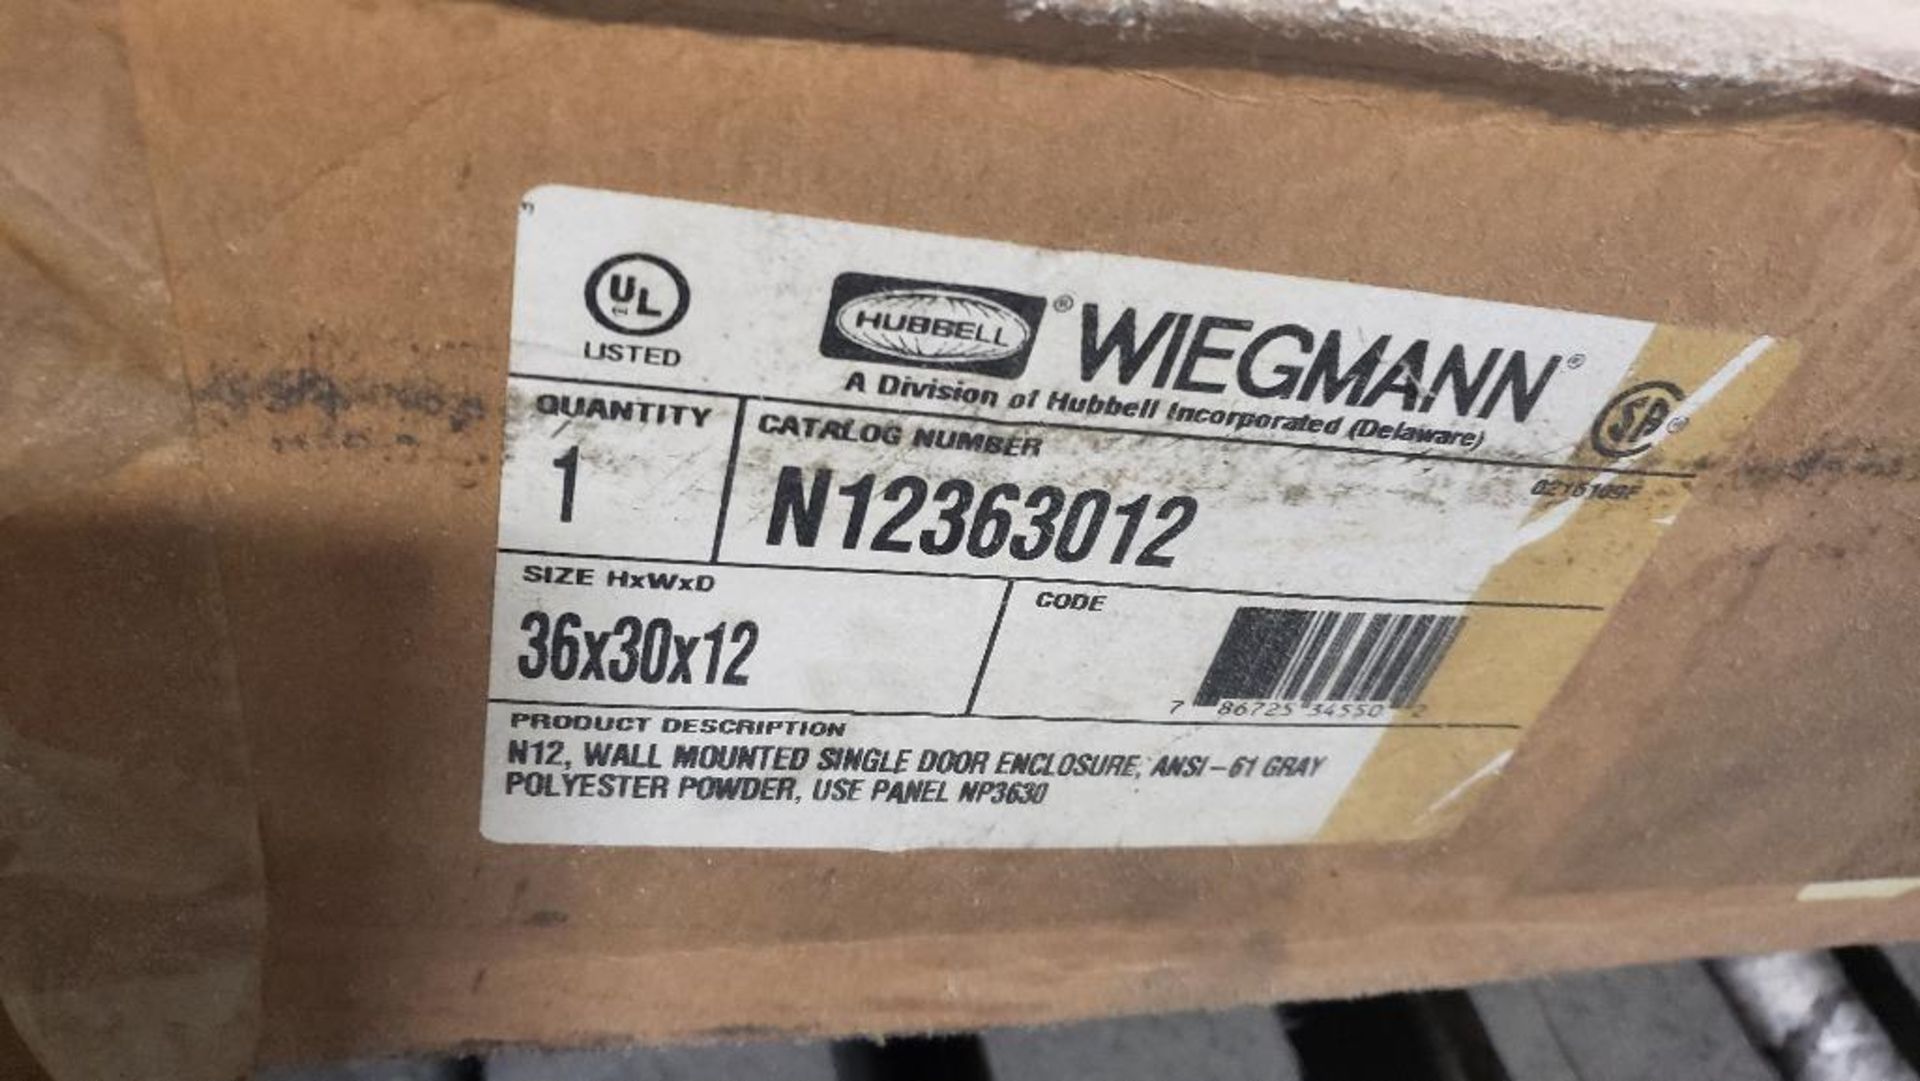 Wiegmann enclosure. Model N12363012. Size 36x30x12. New in box. - Image 2 of 3